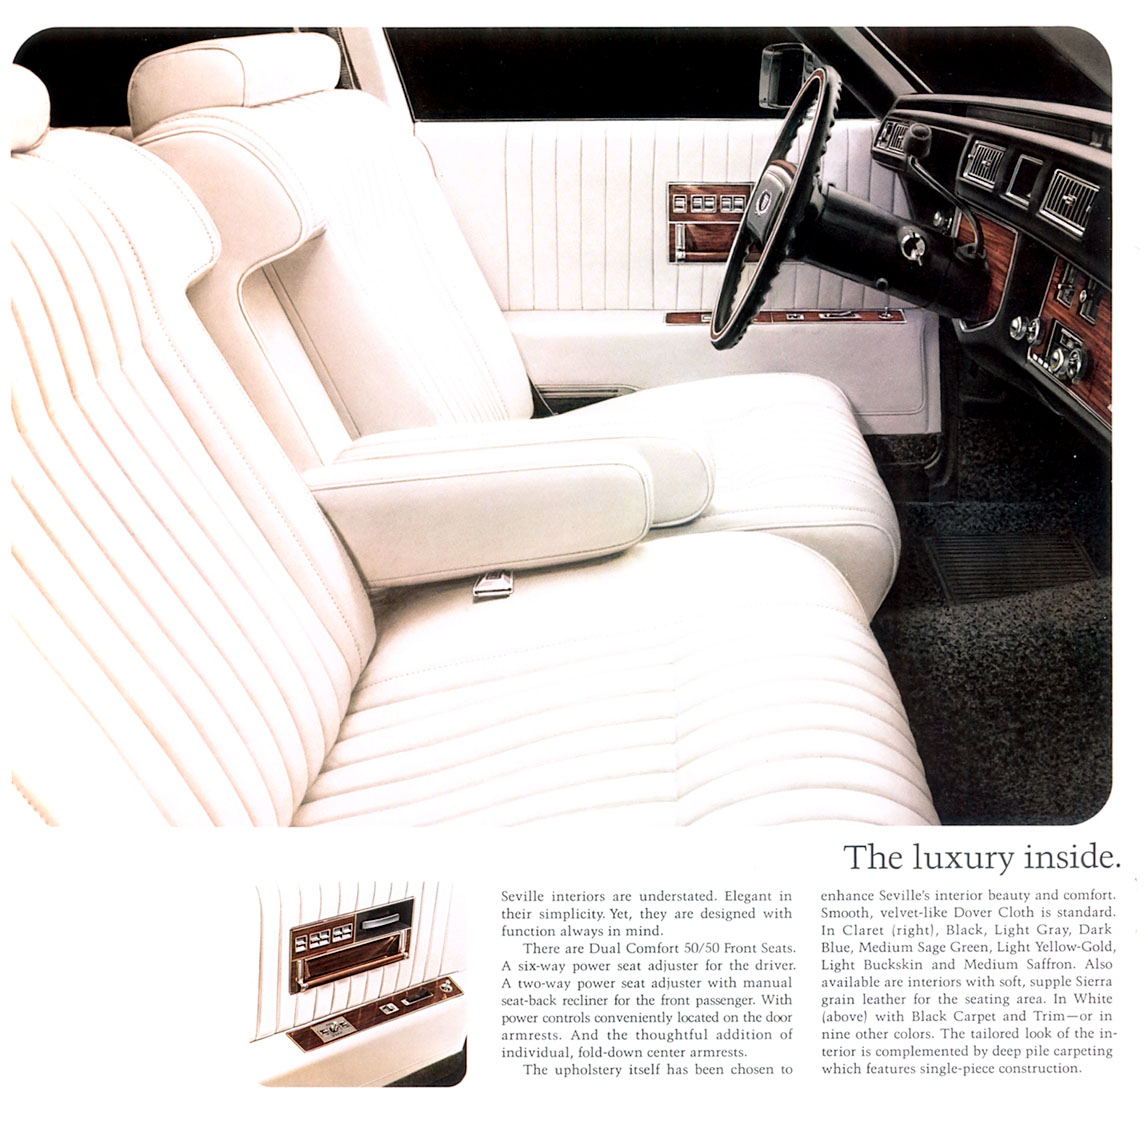 1977 Cadillac Seville Brochure Page 6